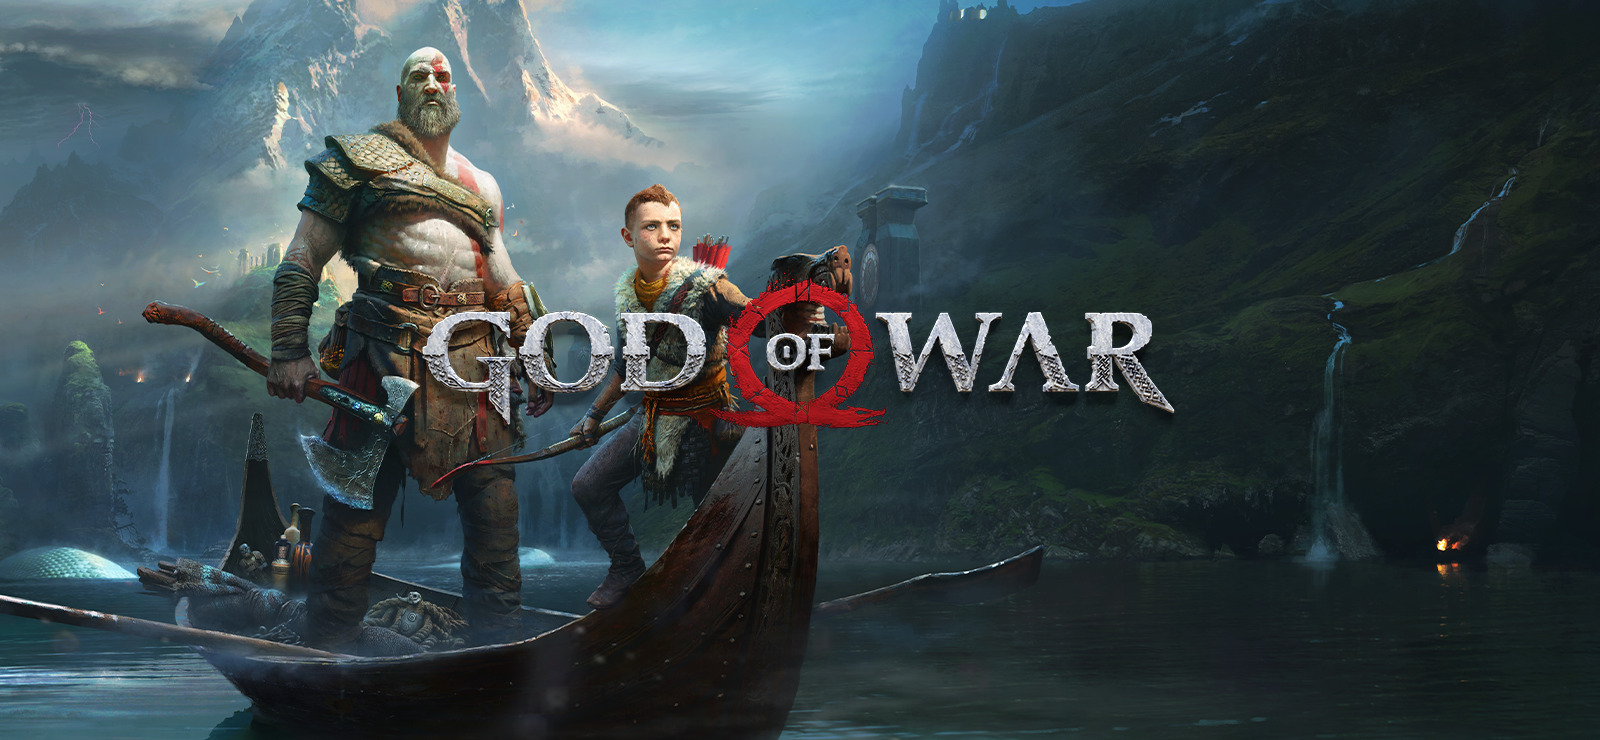 God of war for PC - C$32.57